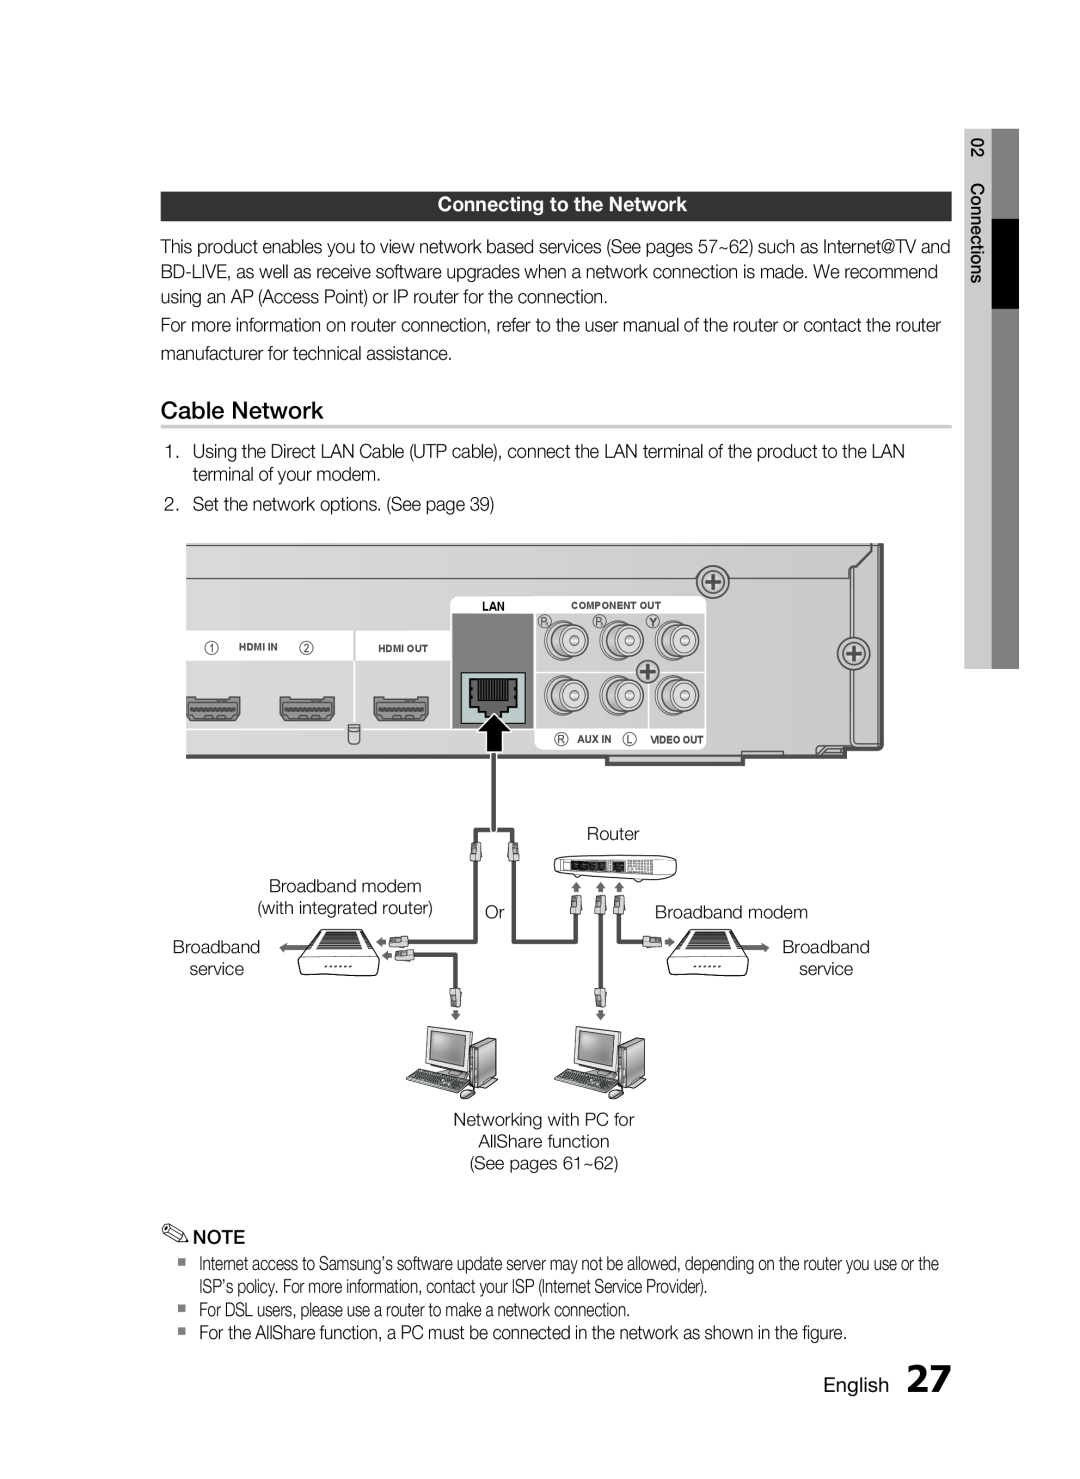 Samsung HT-C6730W, AH68-02290S user manual Cable Network, Connecting to the Network, English 